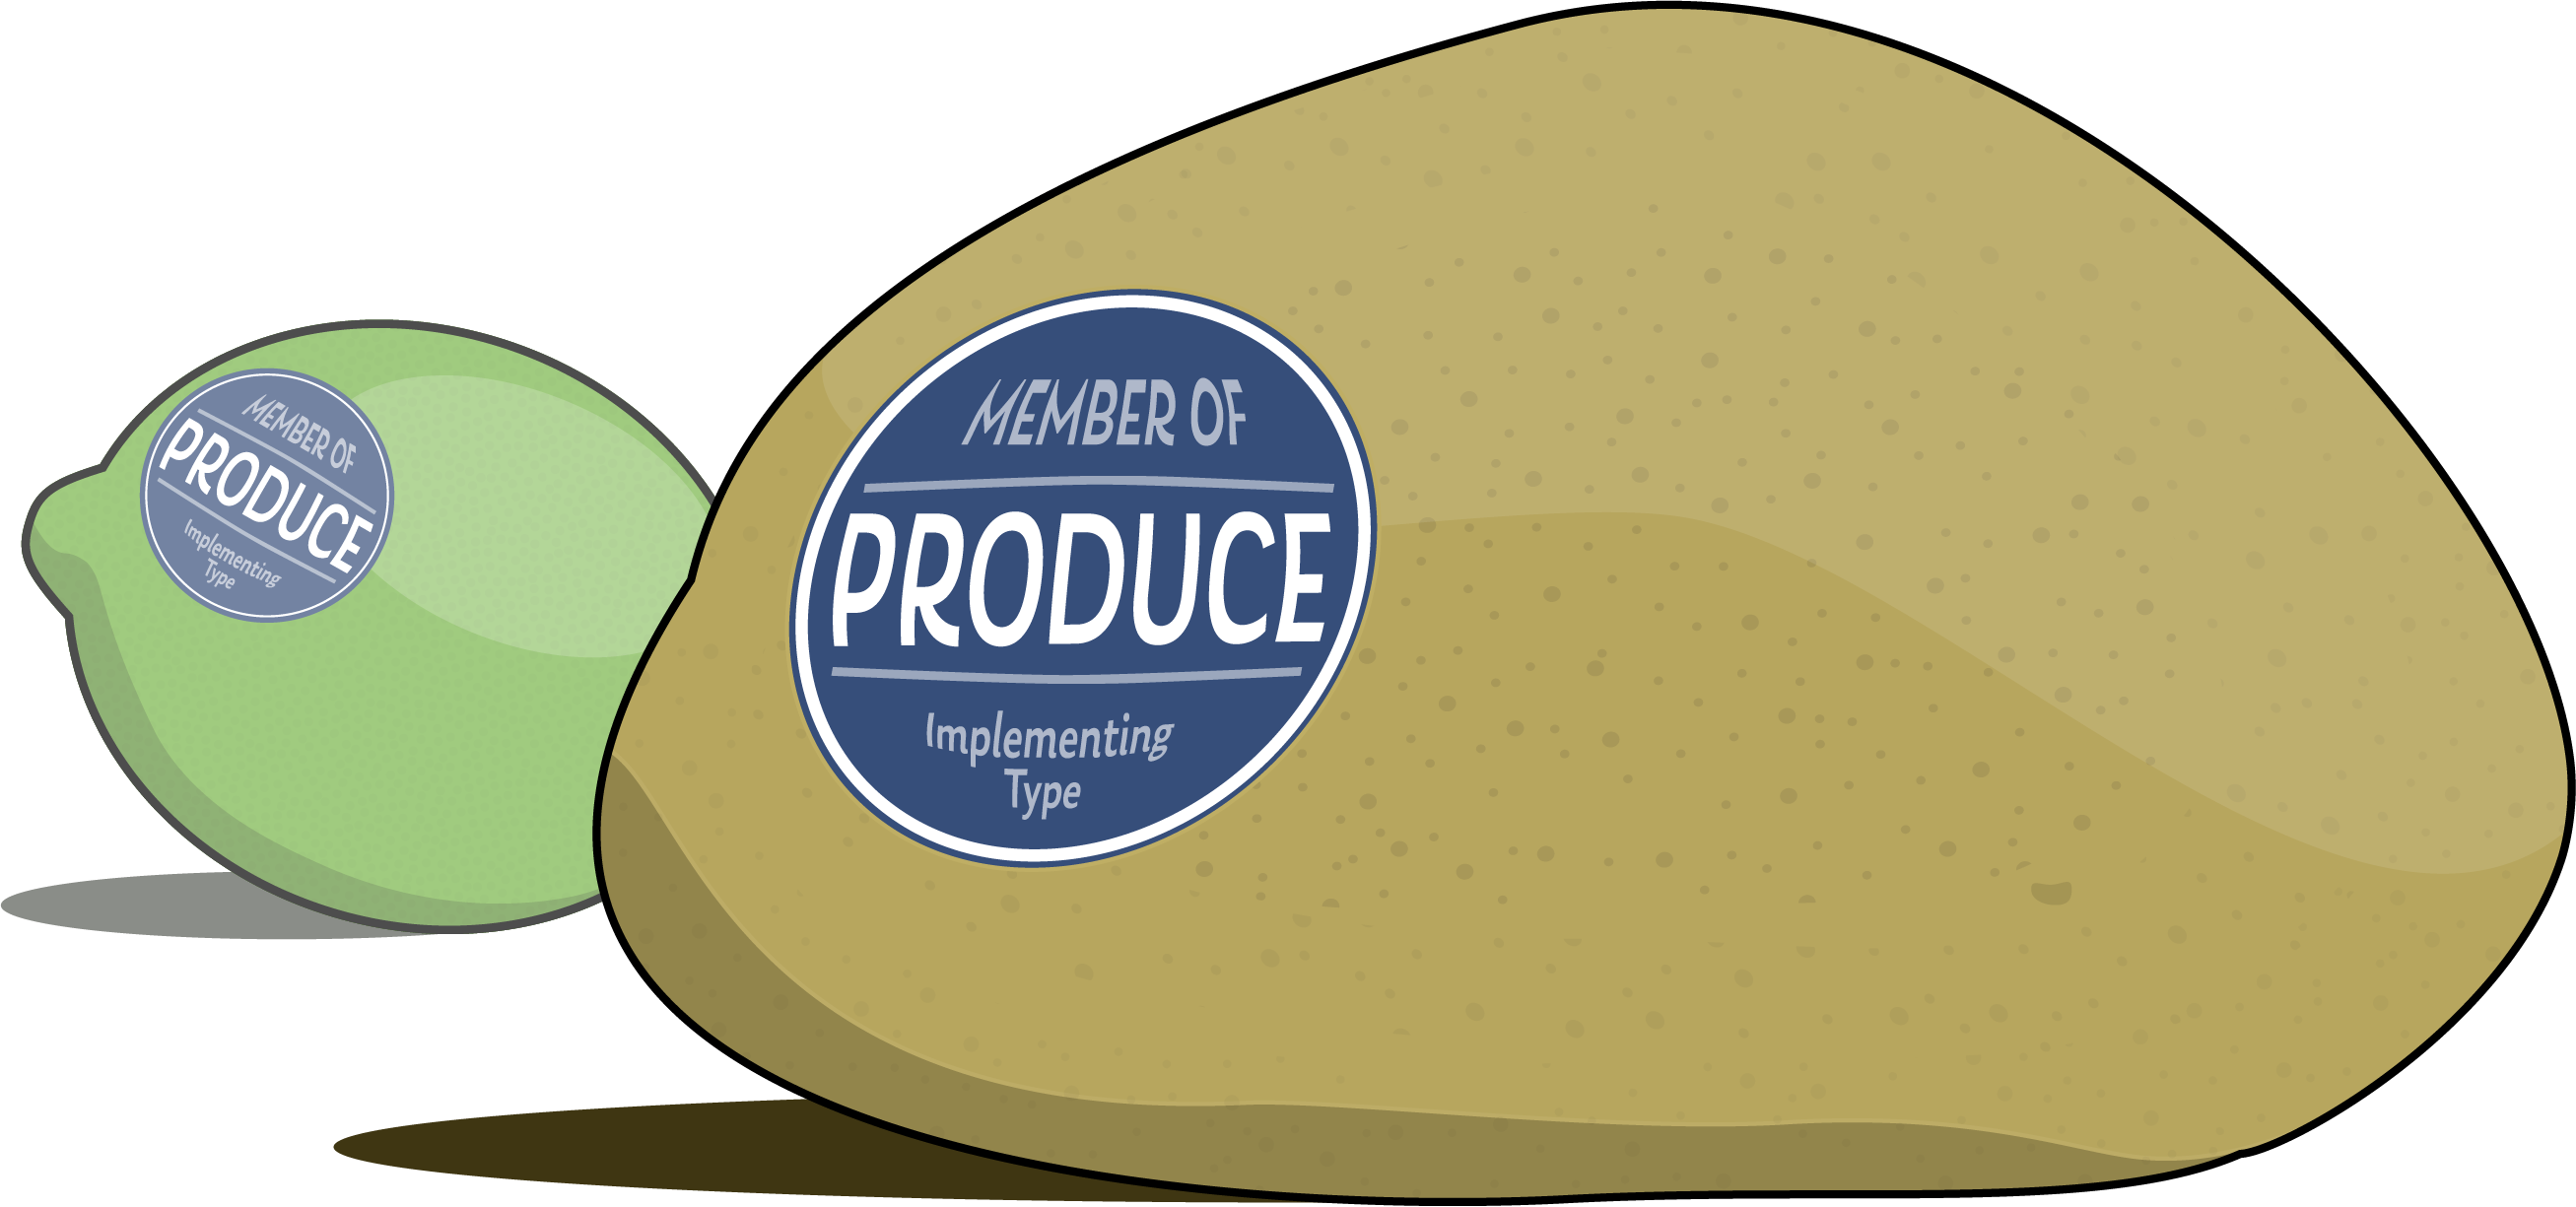 A potato and a lime, both with a sticker that identifies each as a member of Produce.